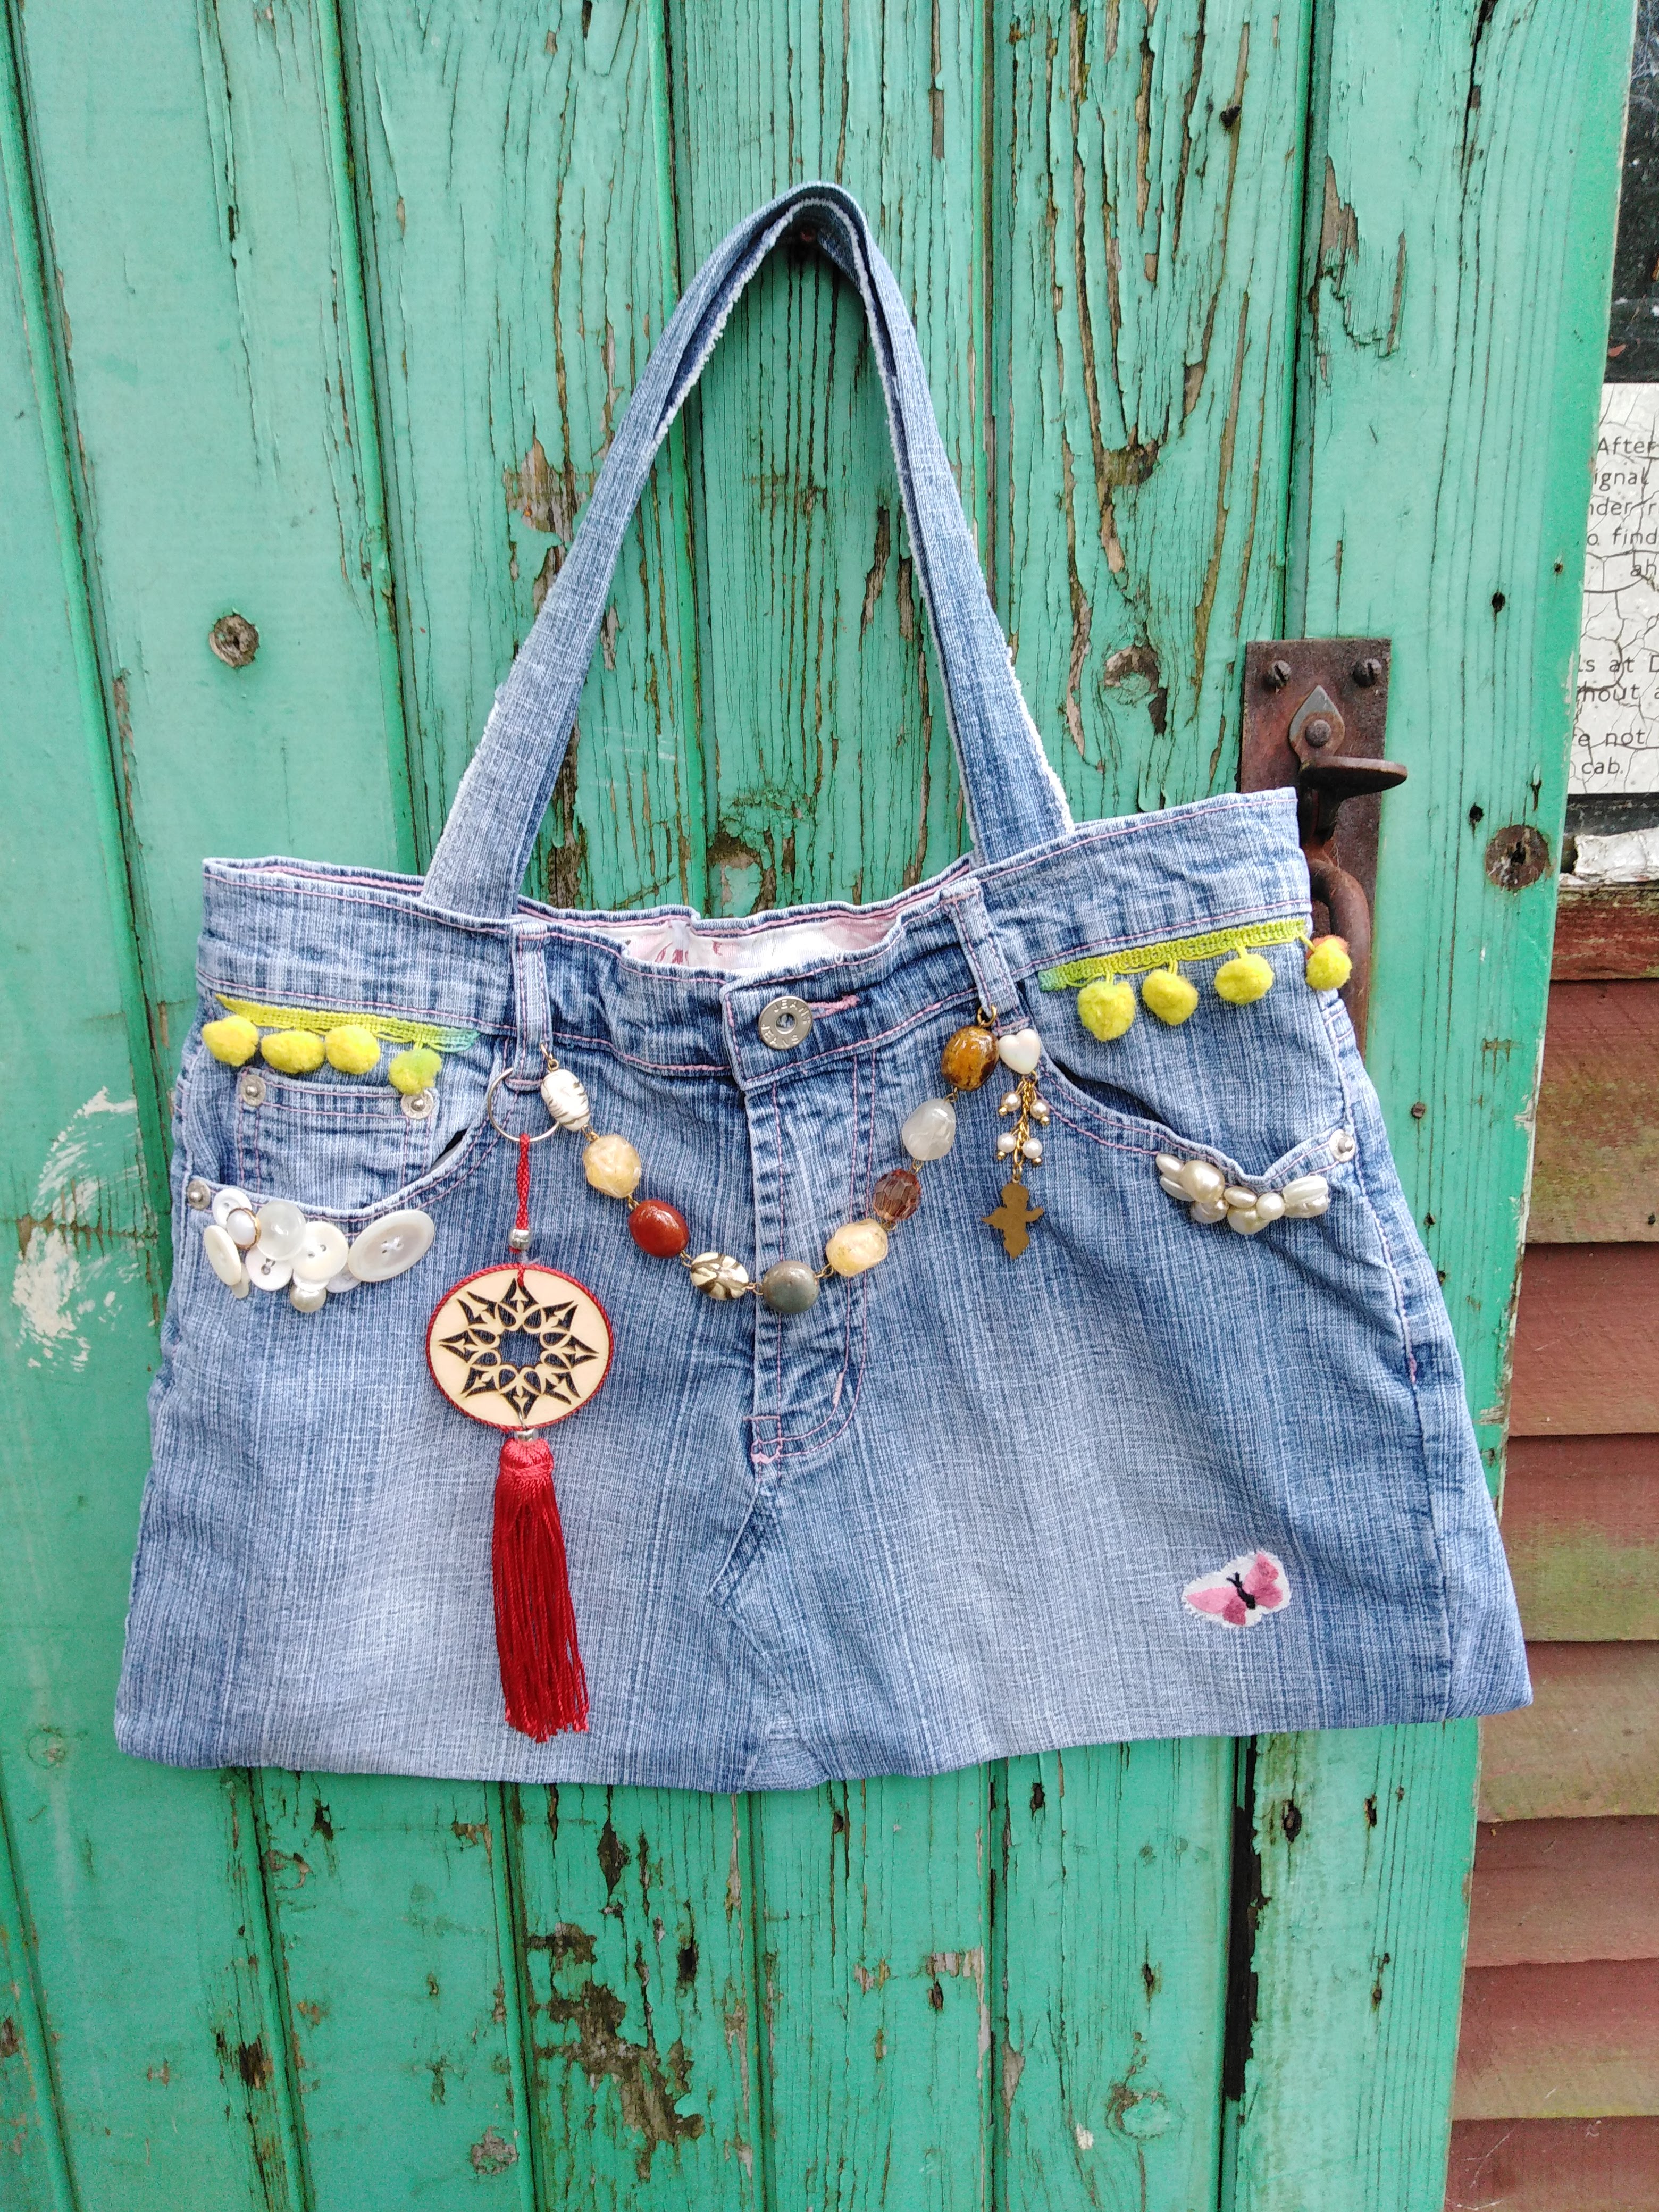 SALE. Upcycled jeans, eco friendly bag, purse. Ladies denim bag, hand finished, denim, decorated 